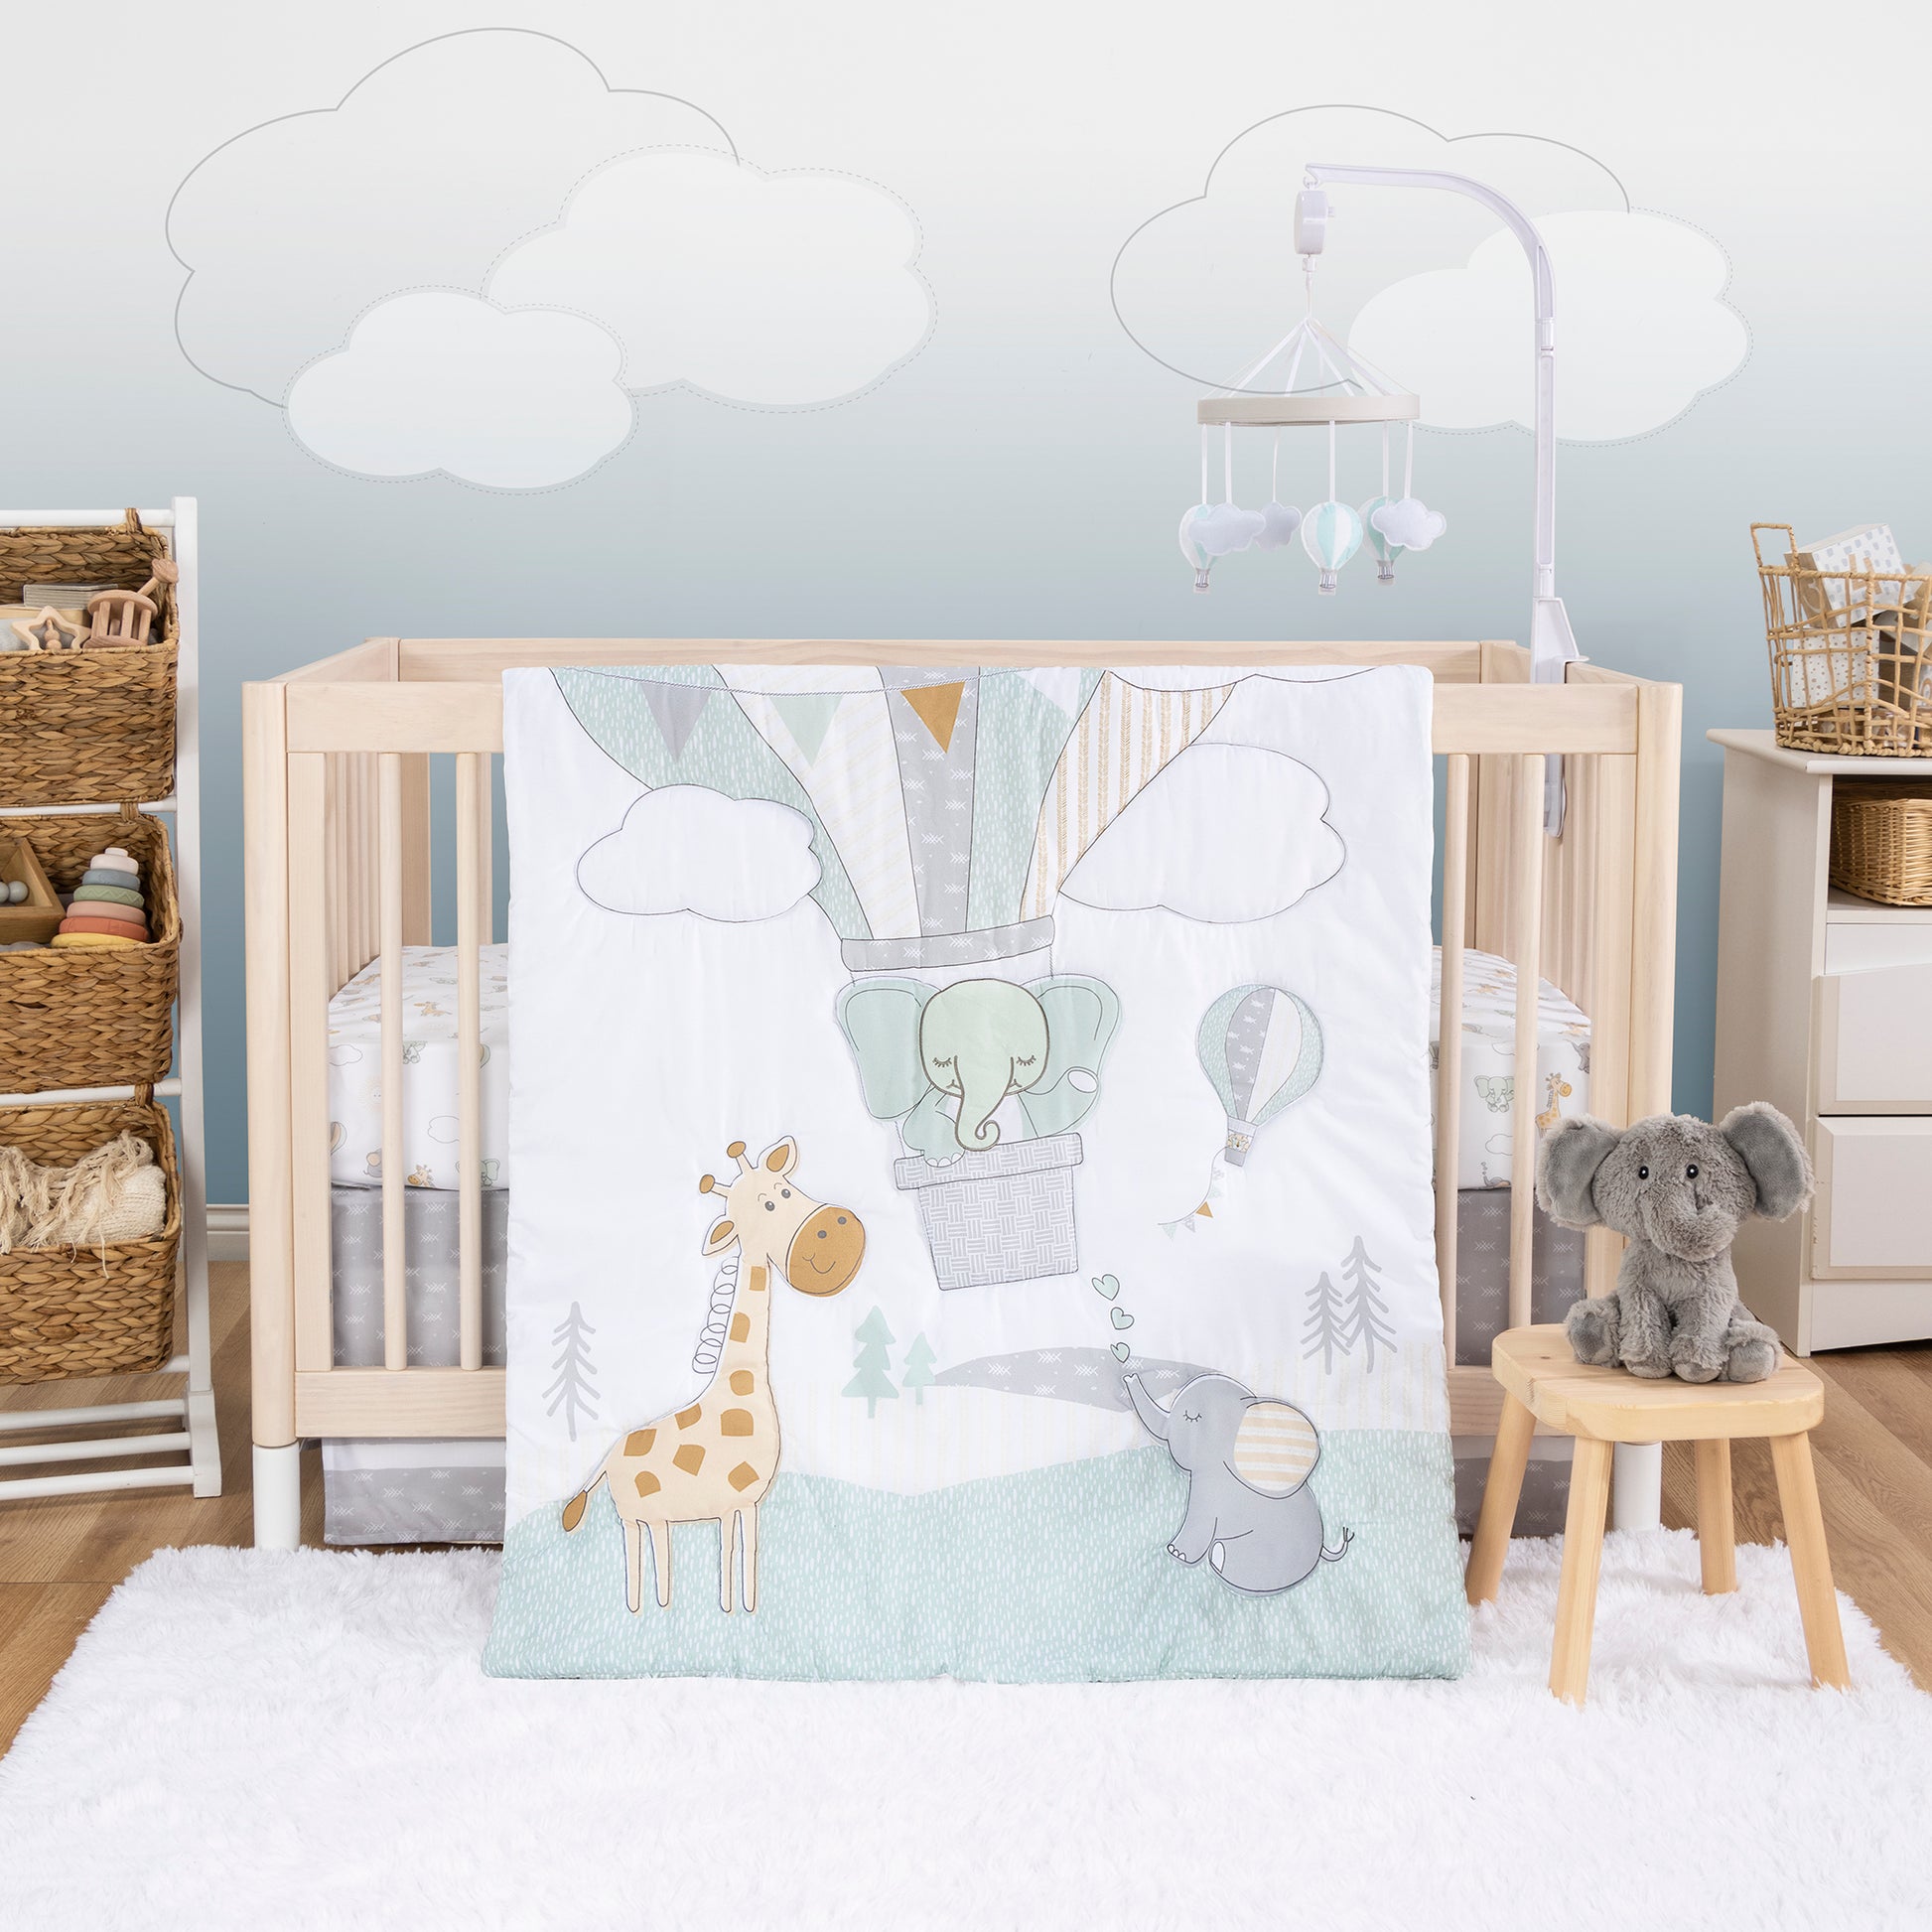 Up Up & Away 4 Piece Crib Bedding Set by Sammy & Lou® - in a stylized bedroom.  This collection features a multi patterned hot air balloon with a sweet friendly elephant surrounded by a baby elephant and a baby giraffe. With a soft muted color palette of sage green, golden orange, and gray, this design will be the perfect tranquil touch to any sweet dreamer's nursery!